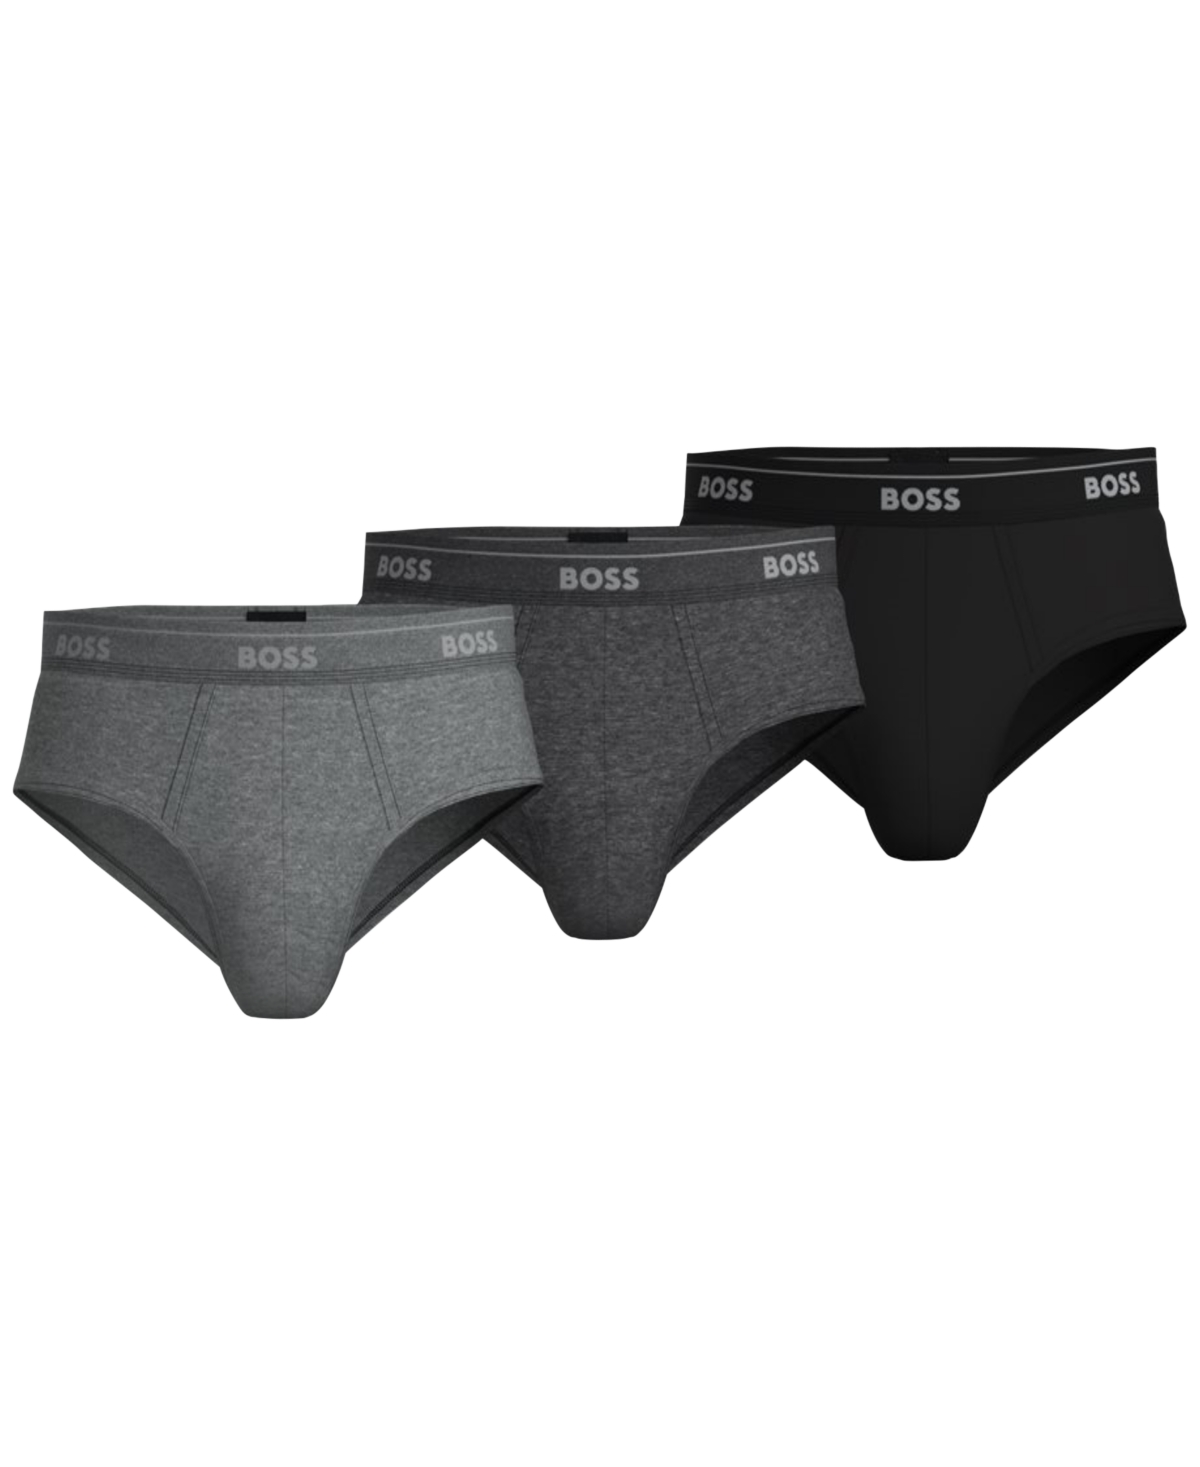 Boss by Hugo Boss Men's 3-Pk. Classic Assorted Color Solid Briefs - Gray